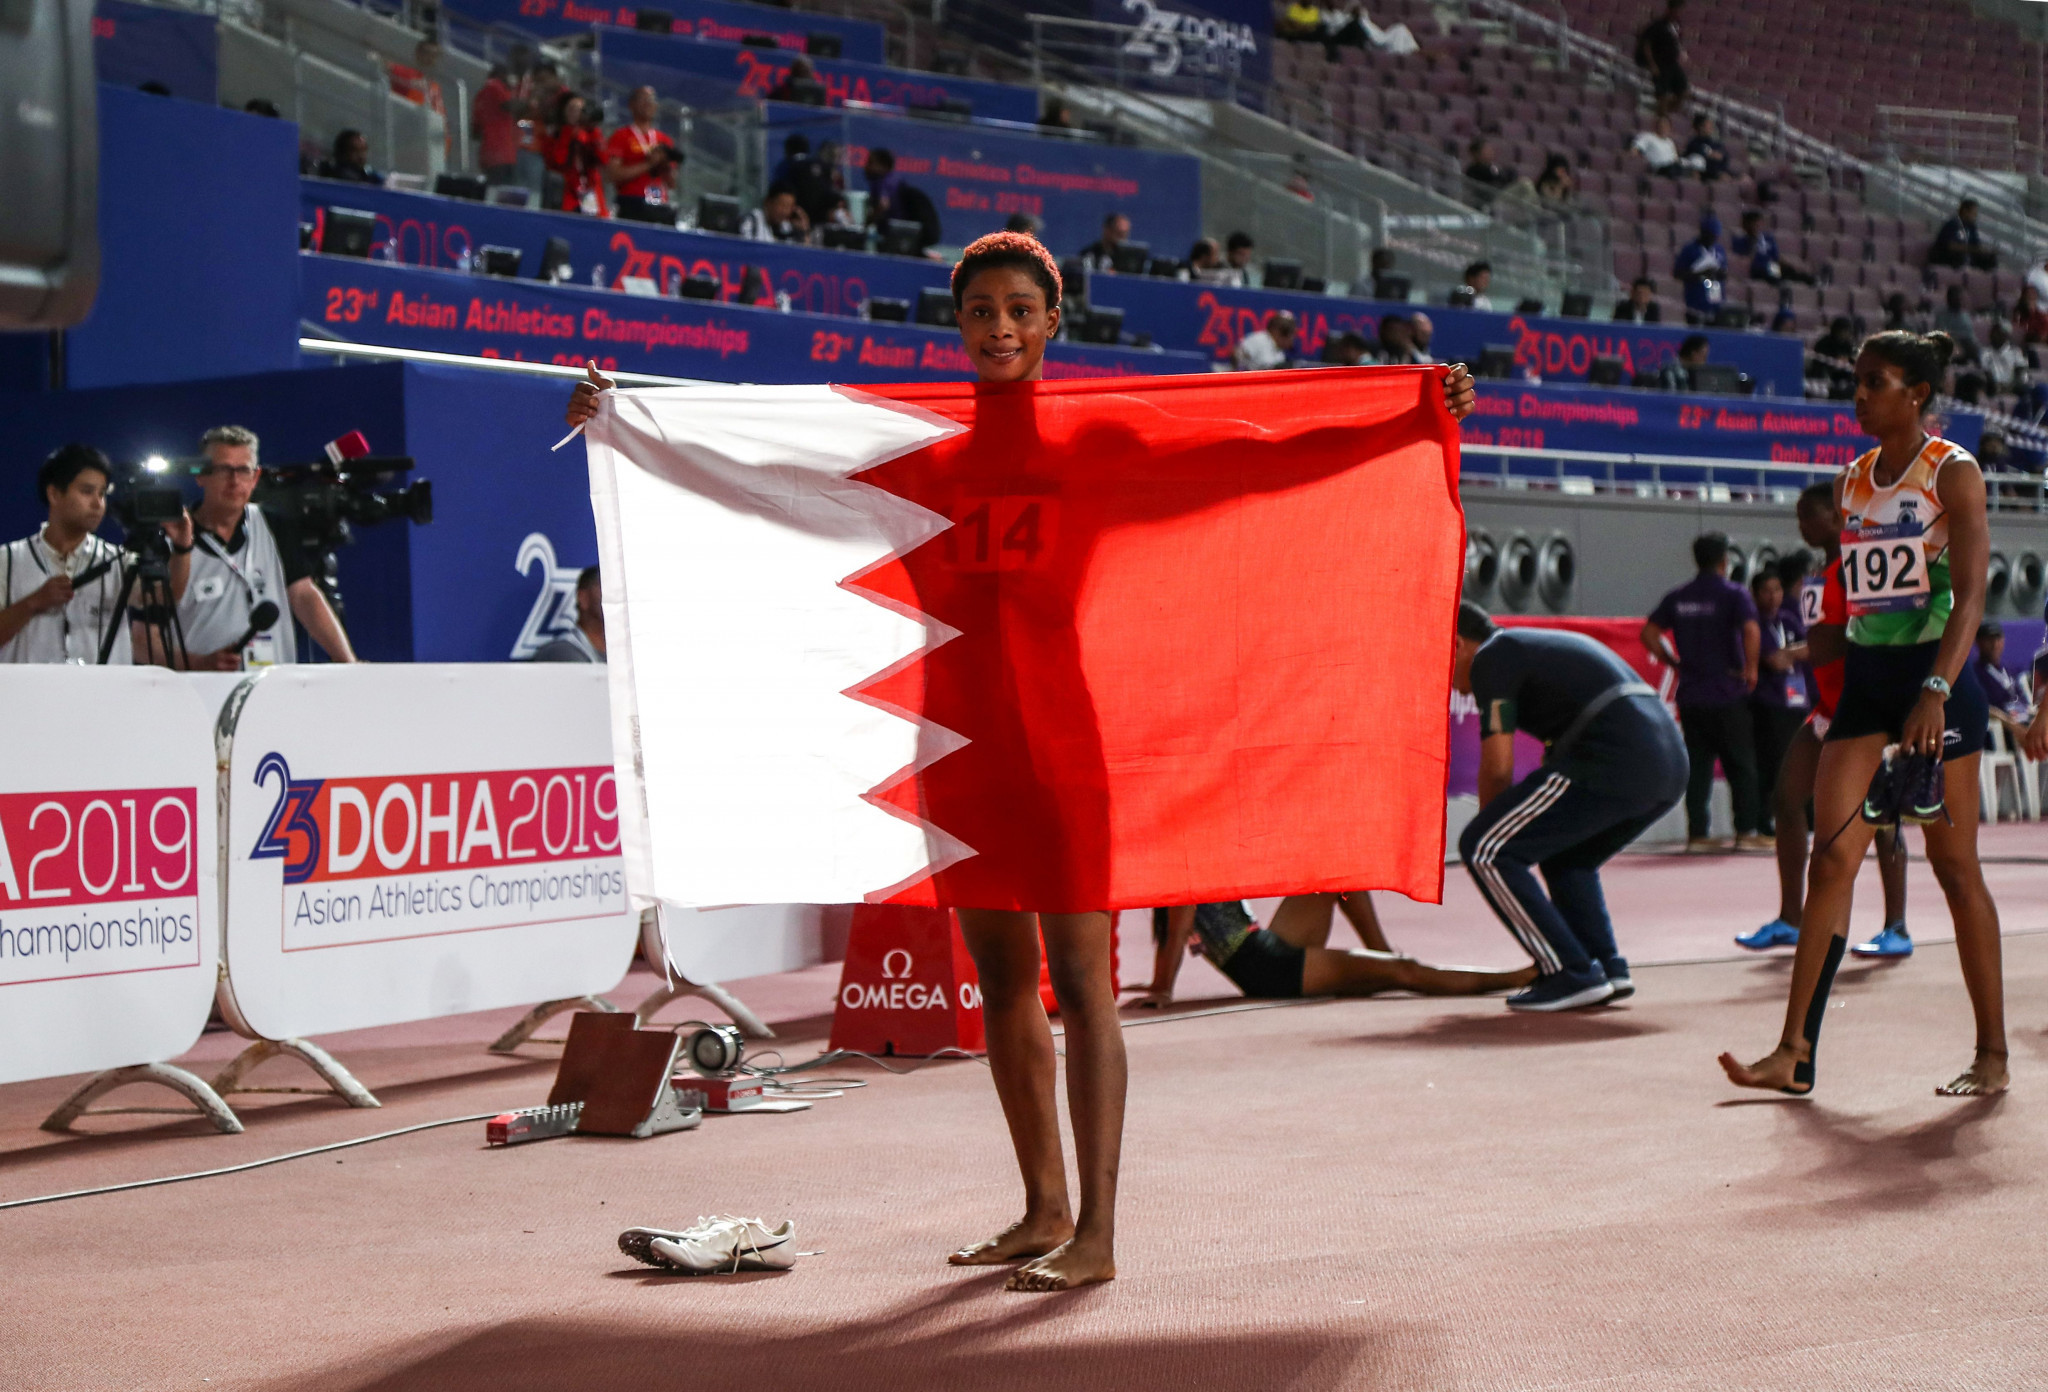 Bahrain's Salwa Naser took her fourth gold on the final day of the Asian Athletics Championships in Doha ©Getty Images